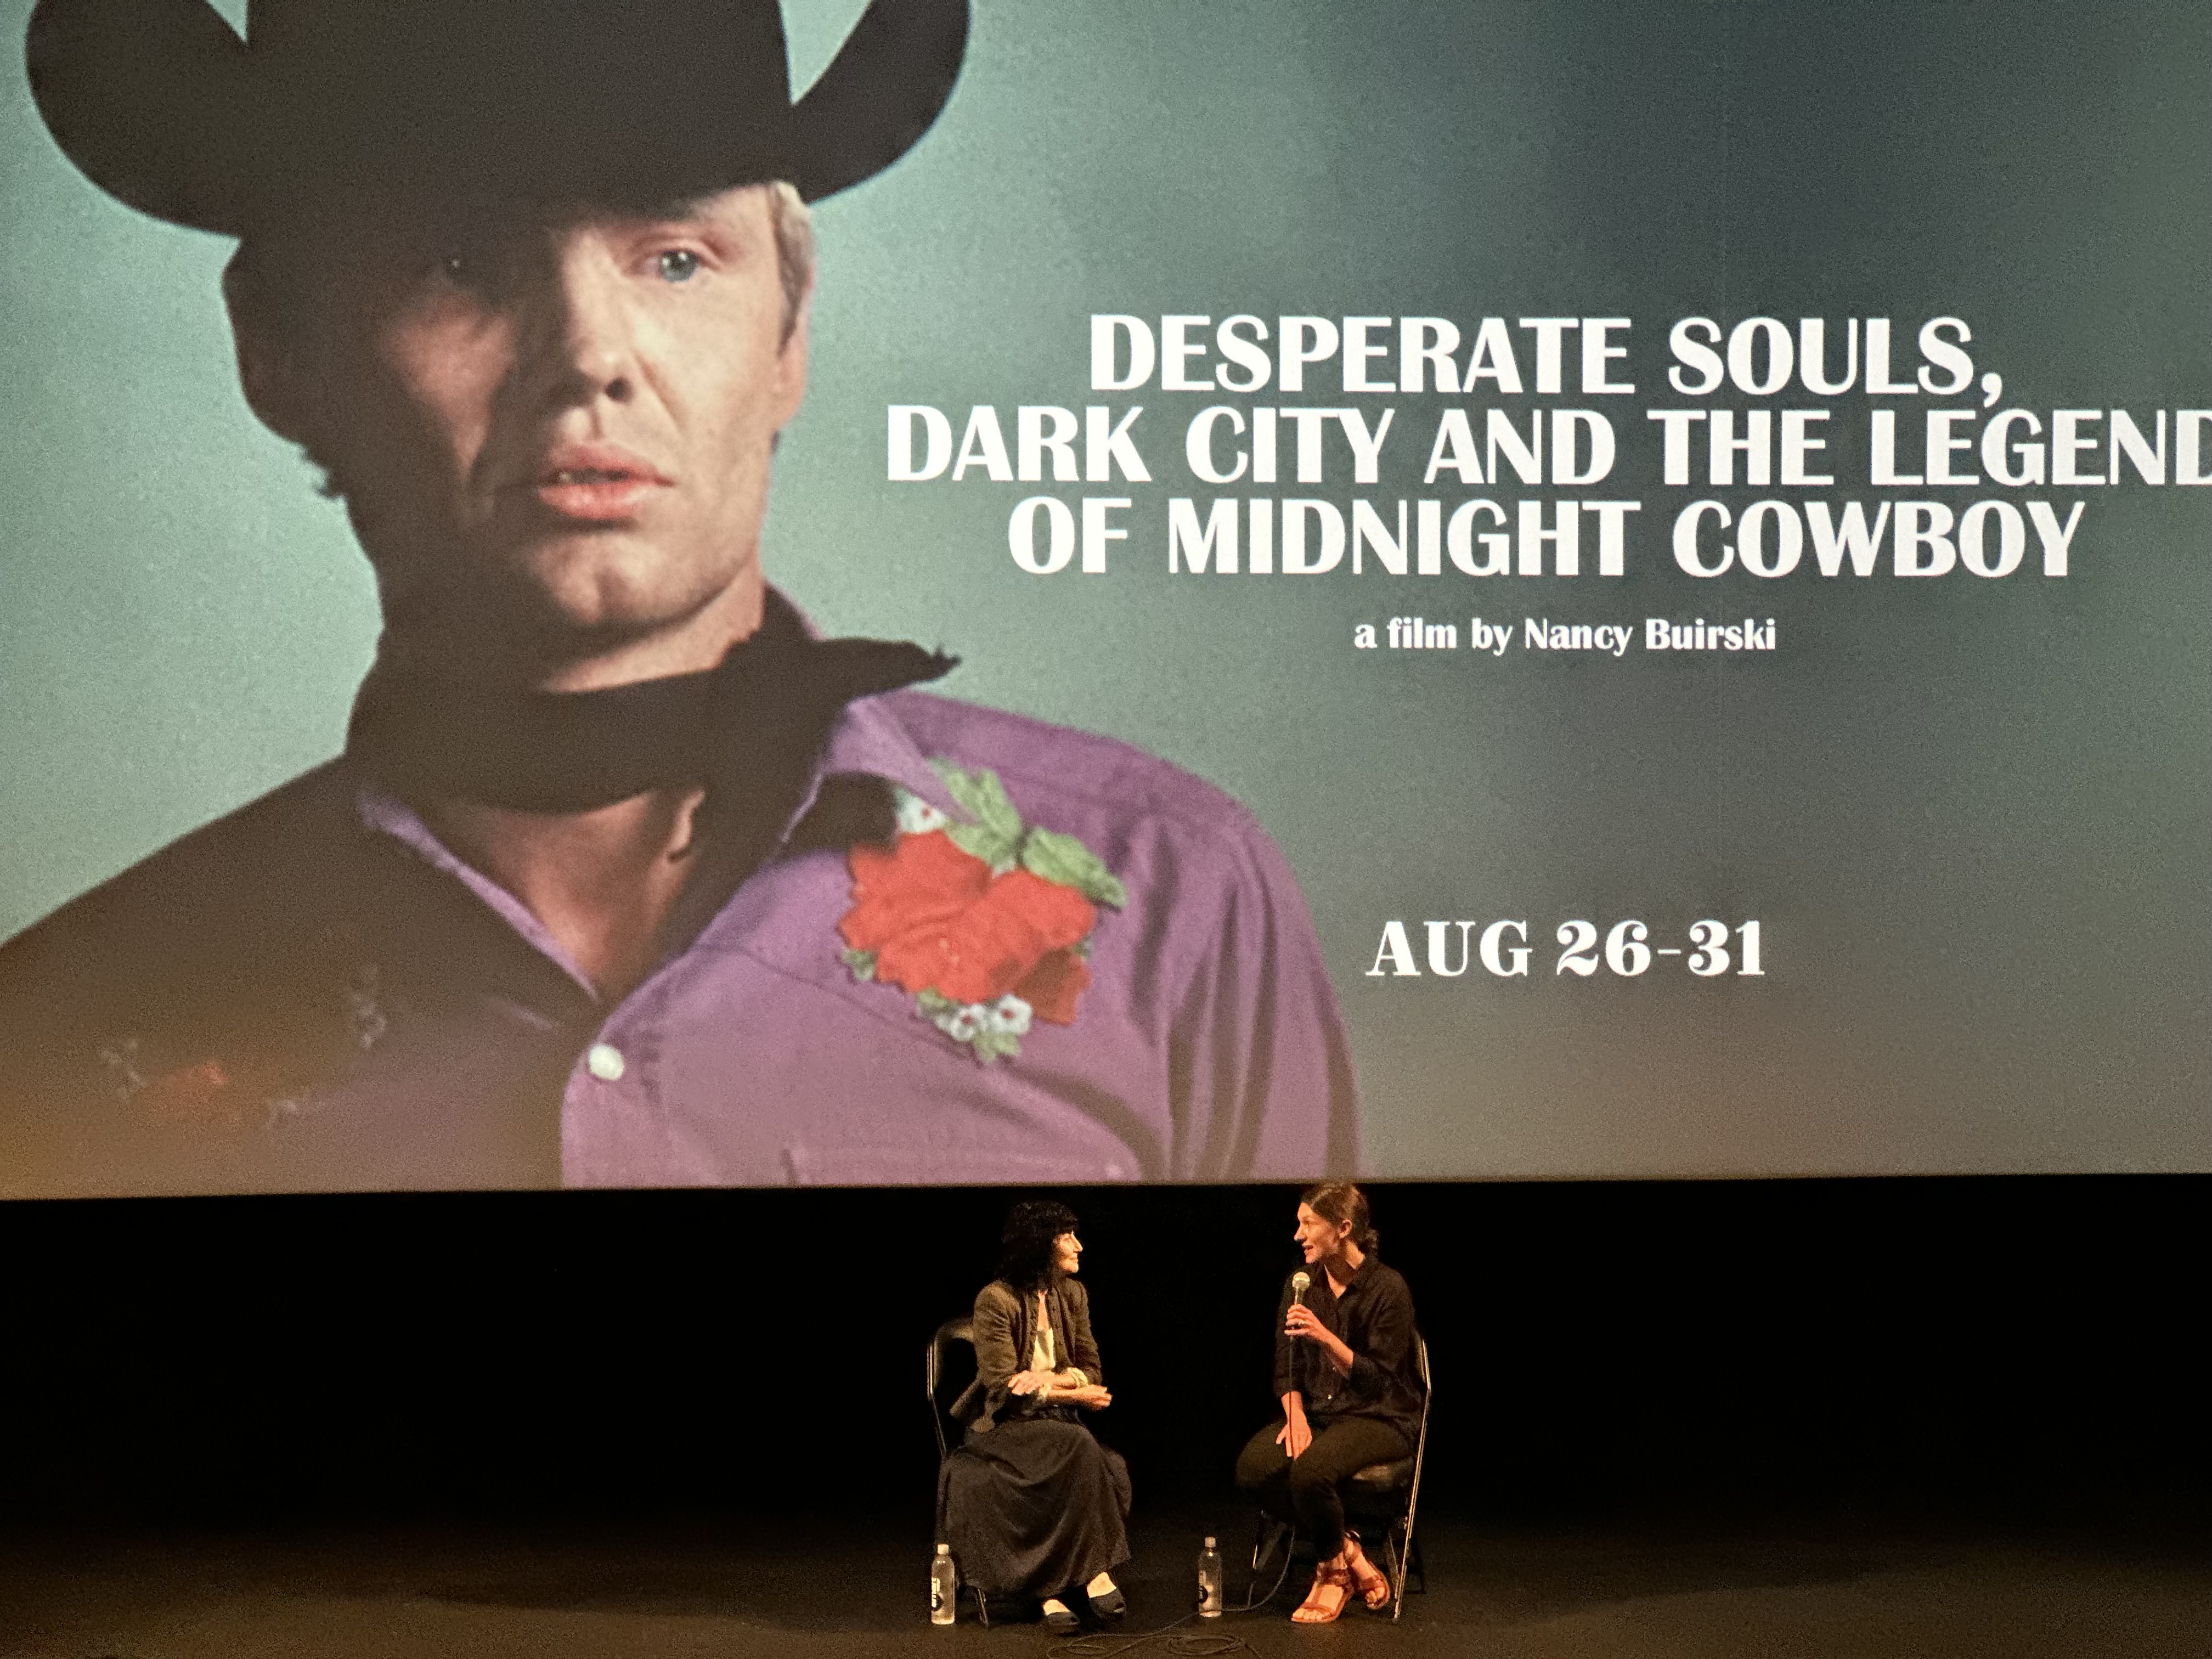 Photo of Nancy Buirski and Sadie Tillery in conversation at a Q&A of 'Desperate Souls, Dark City and the Legend of Midnight Cowboy.' Photo credit: Emily Foster